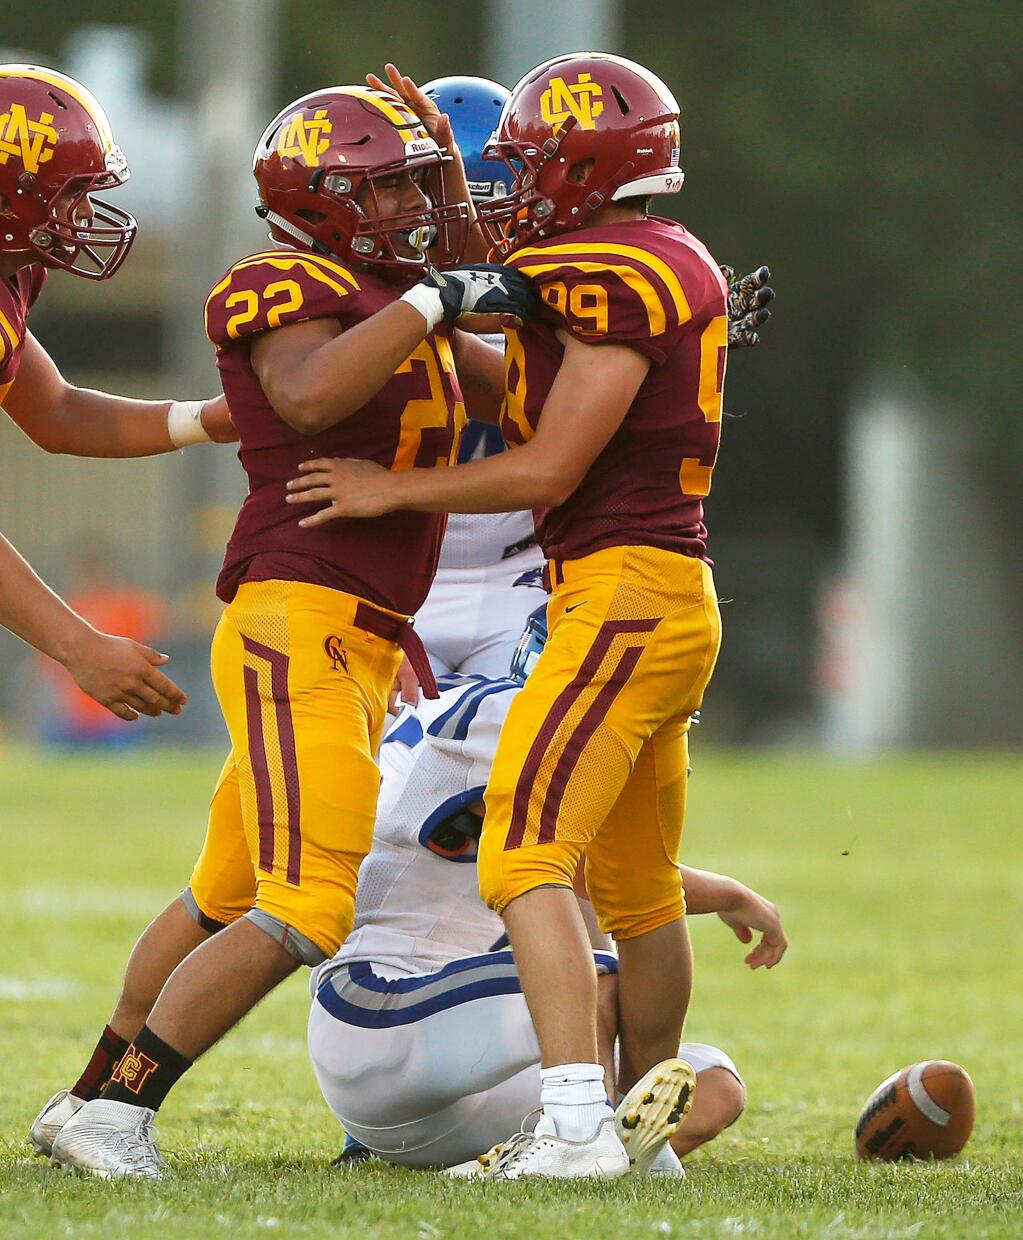 Cardinal Newman's Emylio Vega (22), left, and Bailey Ayre (99) celebrate after teaming up to sack Fortuna quarterback Daeden Taylor (15) in the backfield during the first half of a varsity football game between Fortuna and Cardinal Newman high schools at Healdsburg Recreation Park, in Healdsburg, California, on Thursday, August 22, 2019. (Alvin Jornada / The Press Democrat)